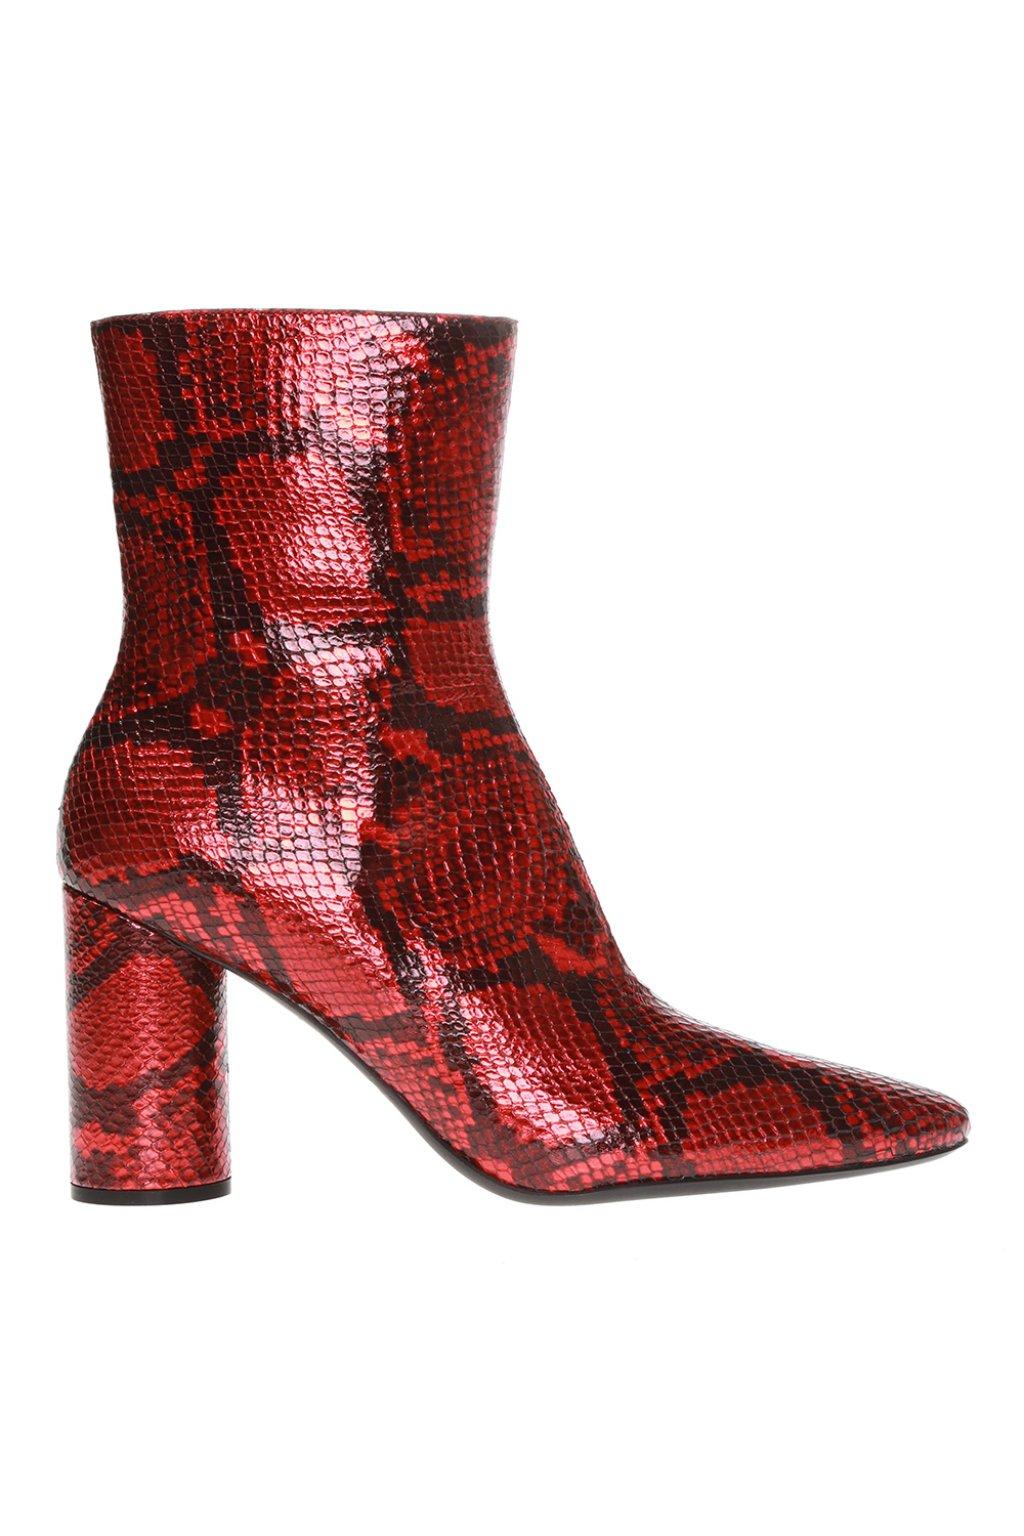 Balenciaga Leather Heeled Ankle Boots in Red - Lyst